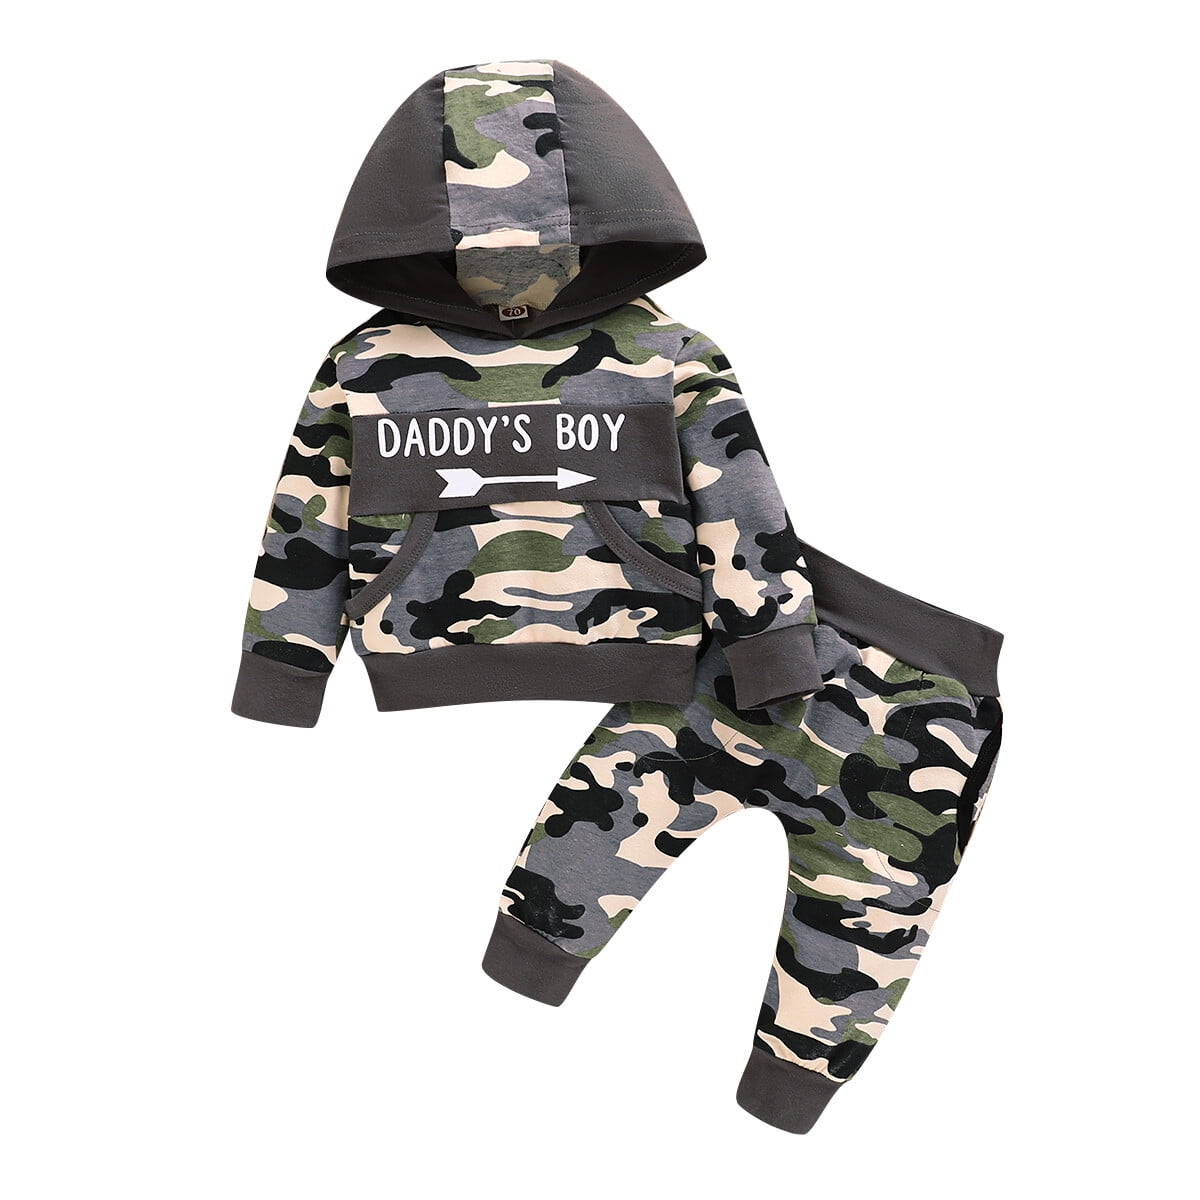 18 Months Baby Boys Outfits 24 Months Toddler Boys Fall Winter Clothes ...